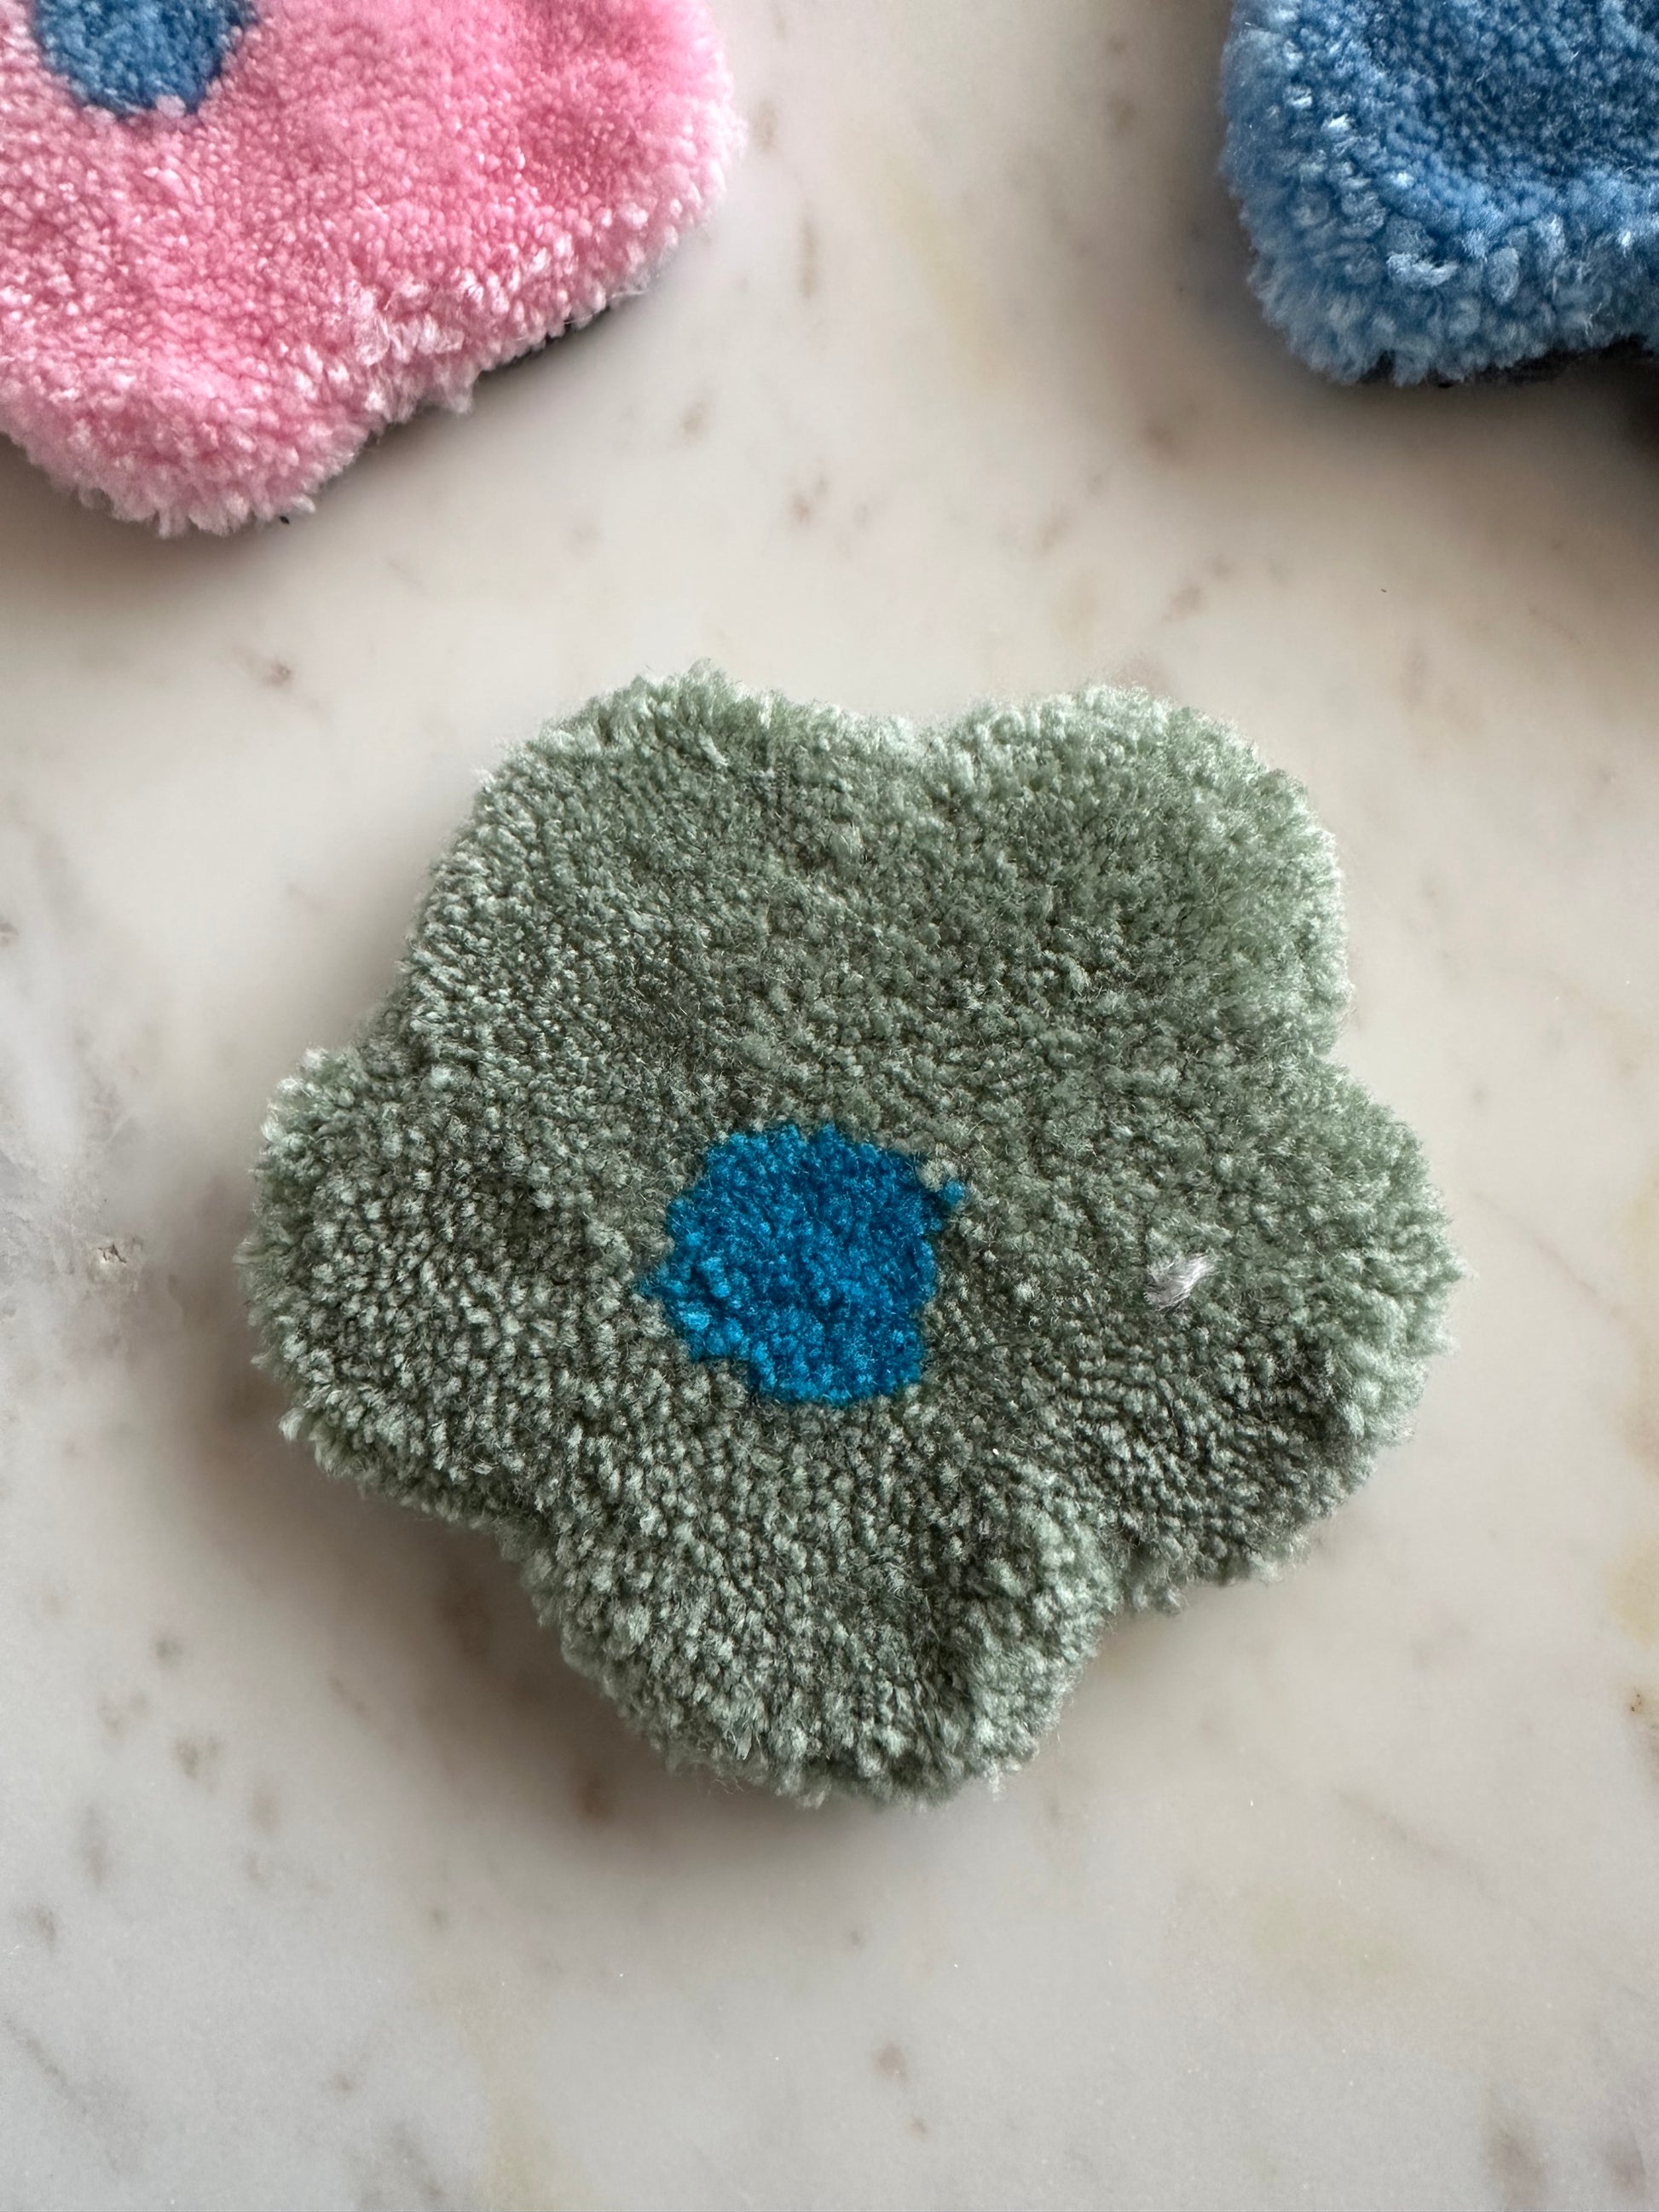 Shows one of our tufted flower coasters with green petals and a blue core. Made by The Woollers